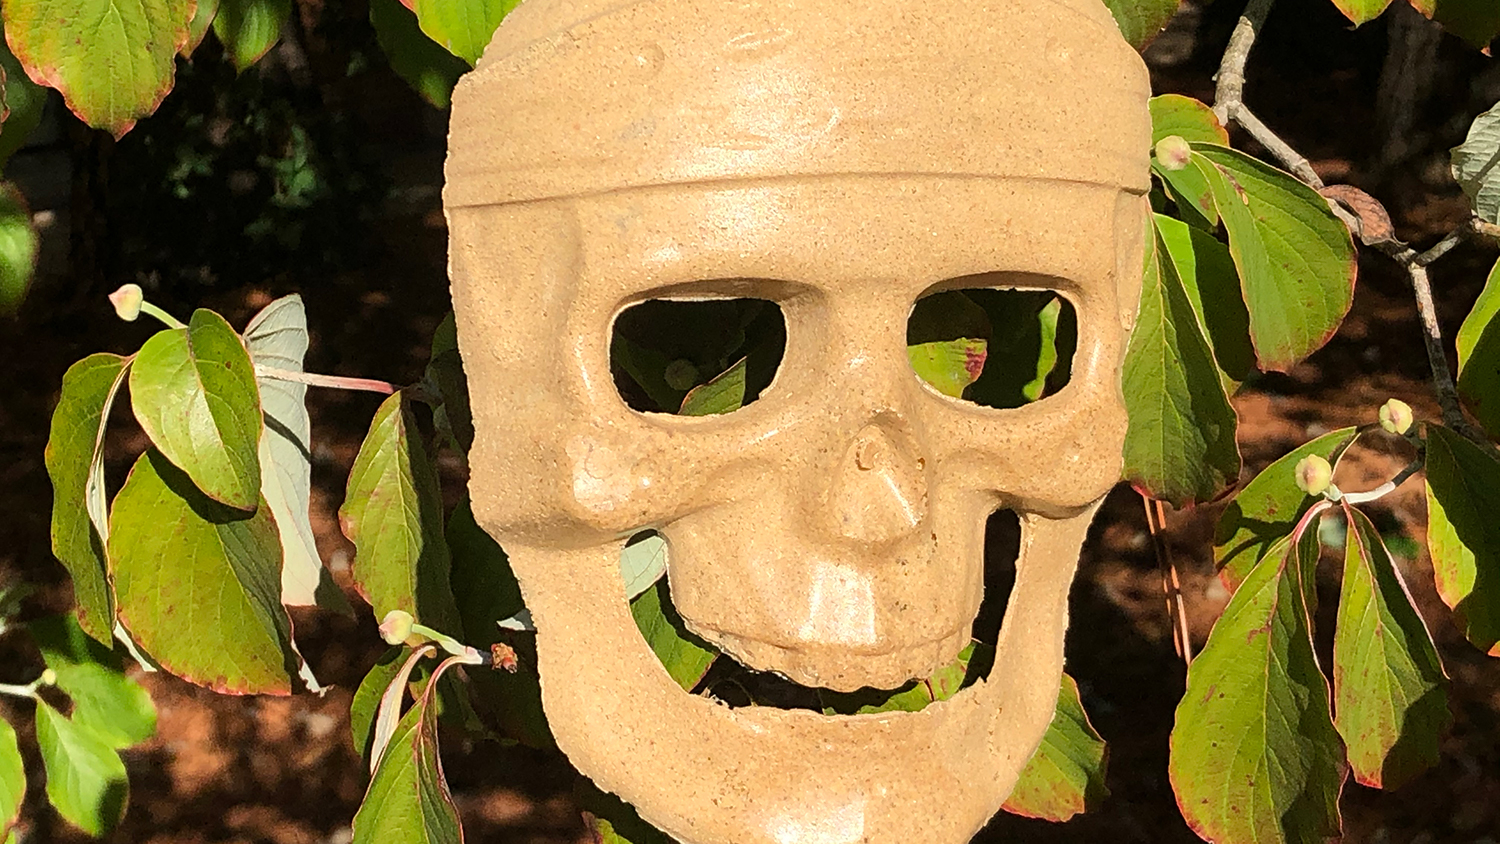 Skull Head - Your Next Halloween Mask Could Be Made from Trees - Forest Biomaterials NC State University